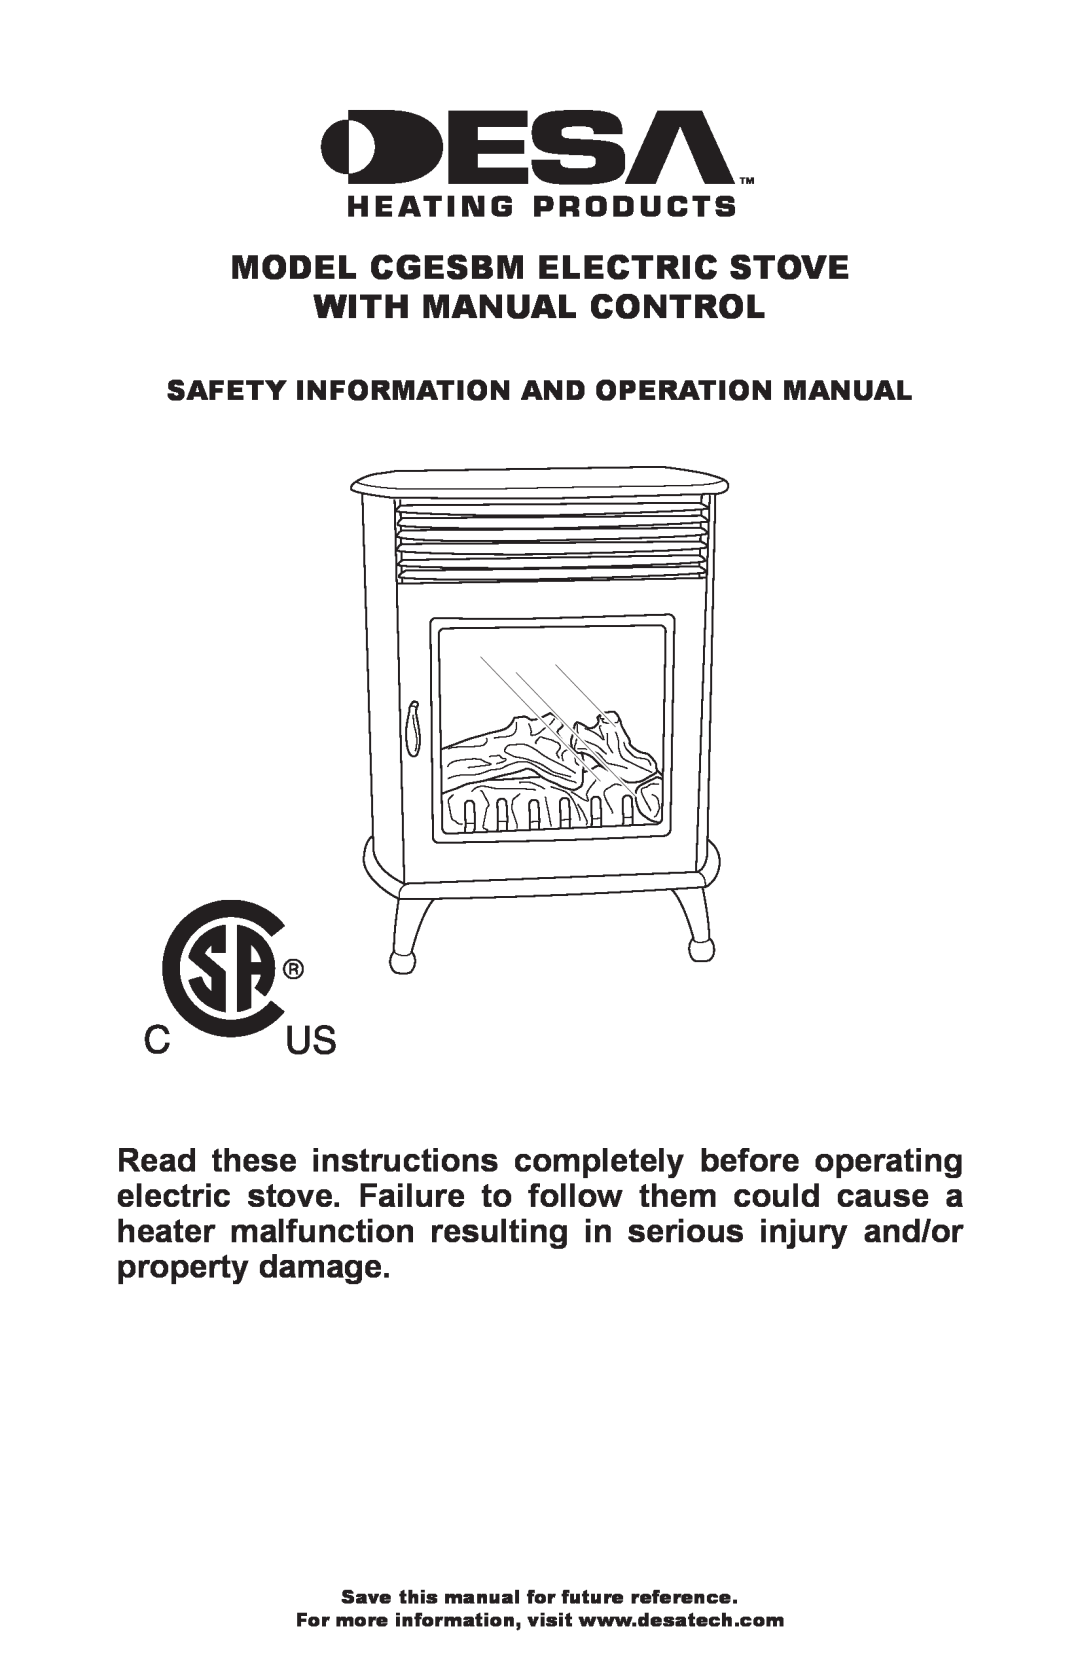 Desa CGESBM operation manual Model Cgesbm Electric Stove With Manual Control, Save this manual for future reference 